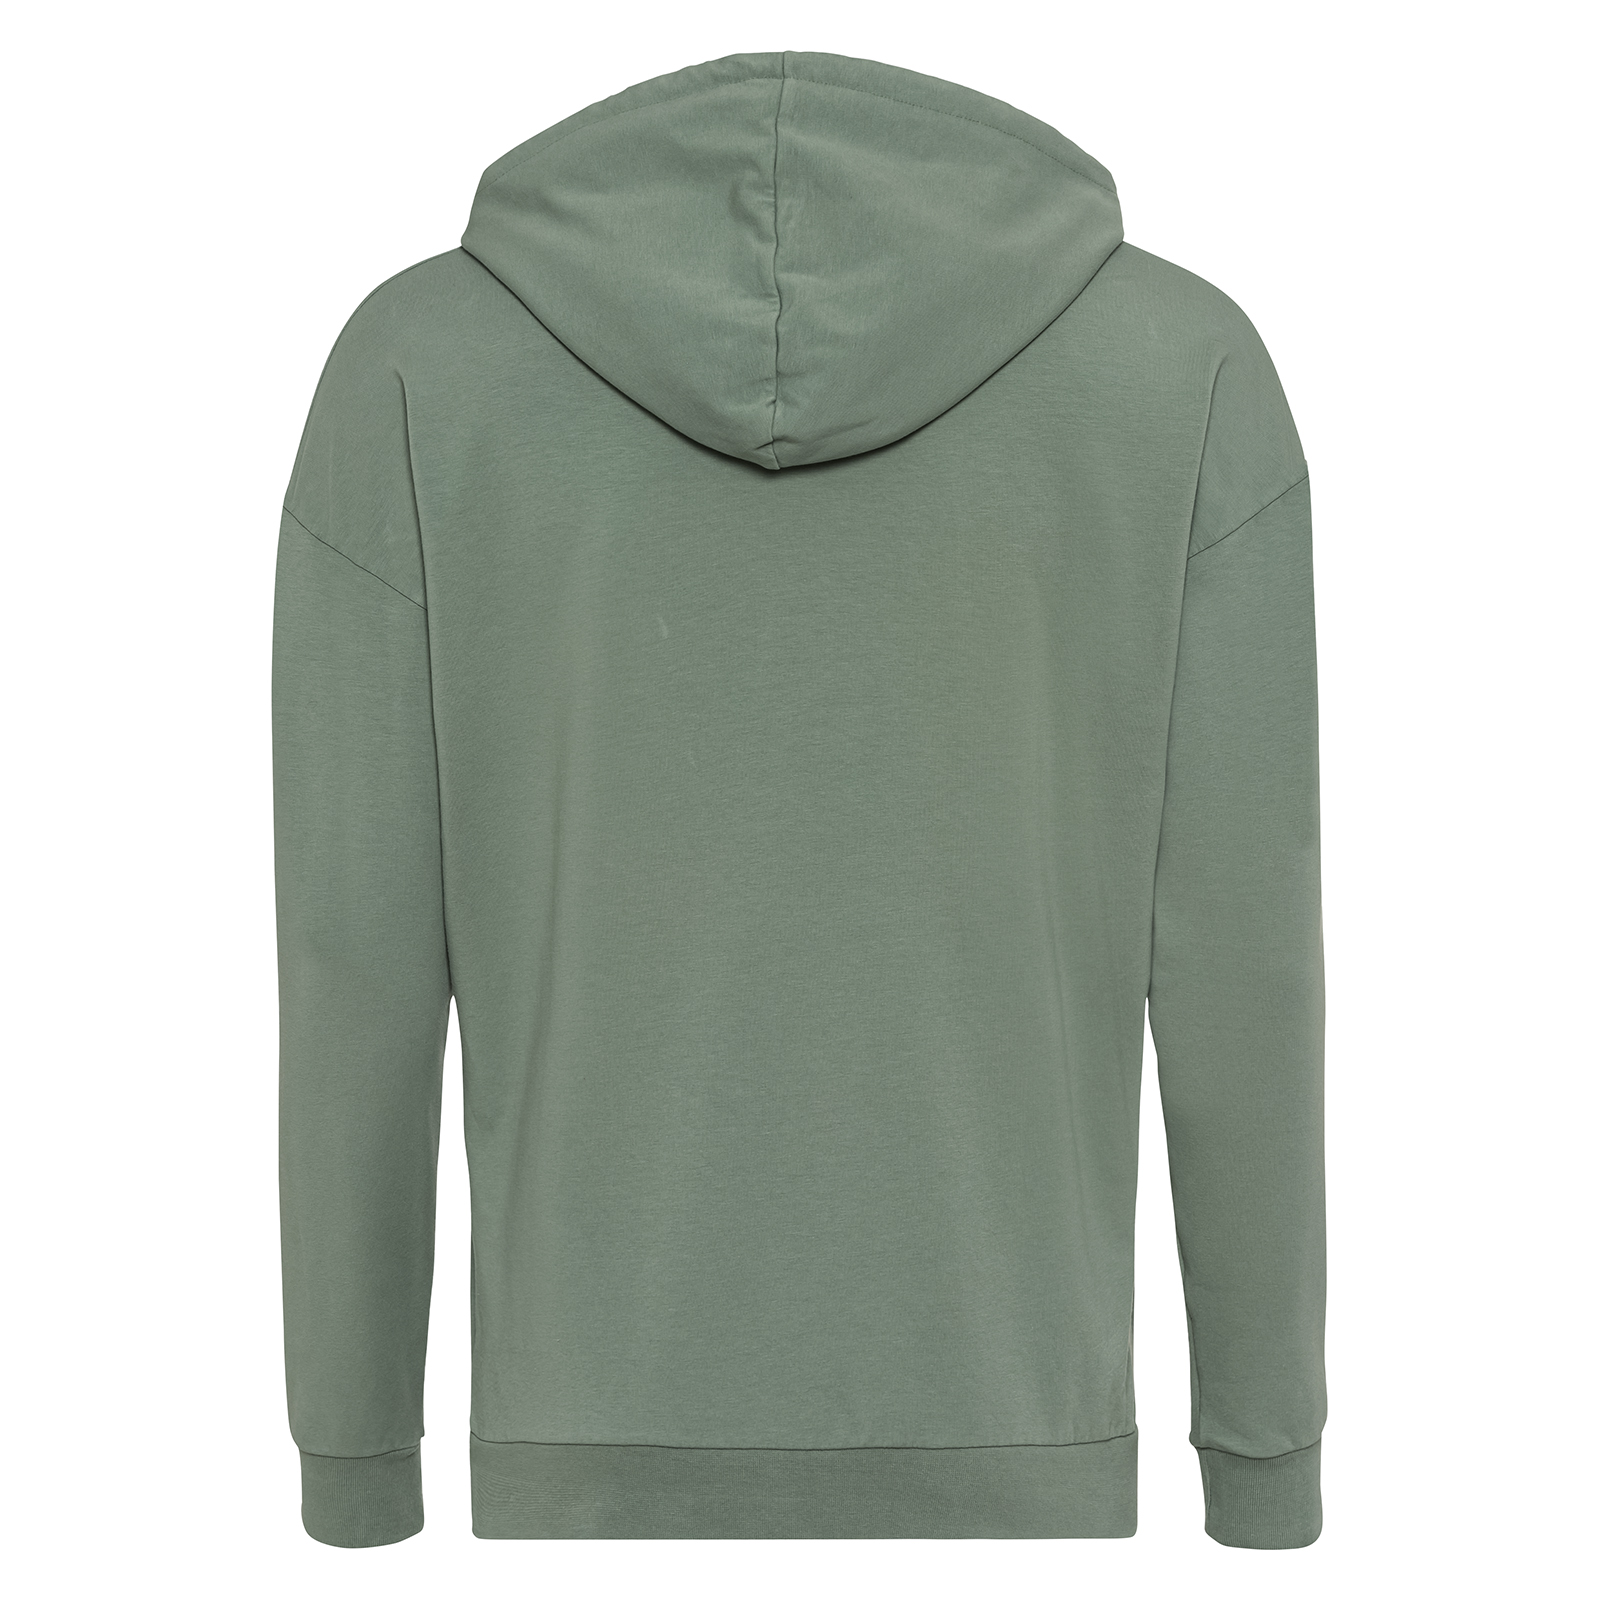 Men's sustainable, sporty sweater with hood